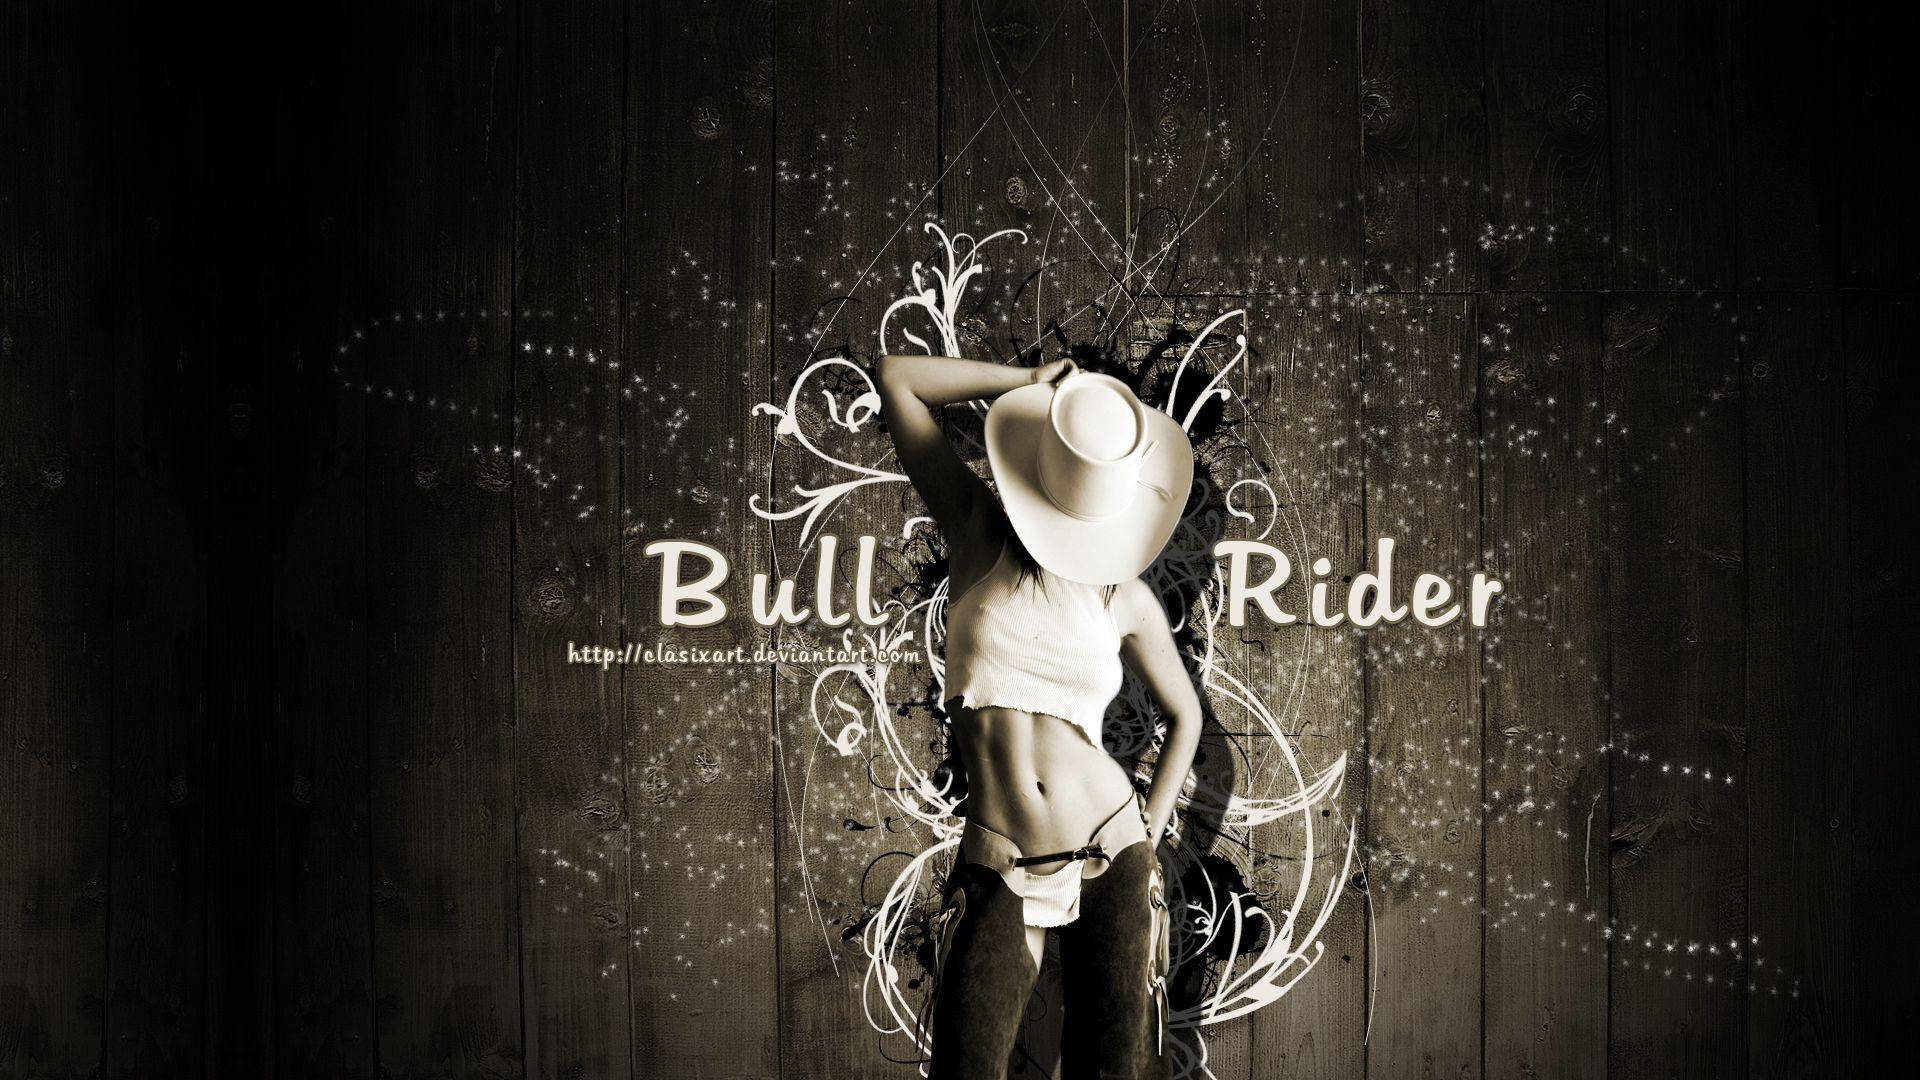 A Bold Bull Rider Gearing Up For The Next Challenge